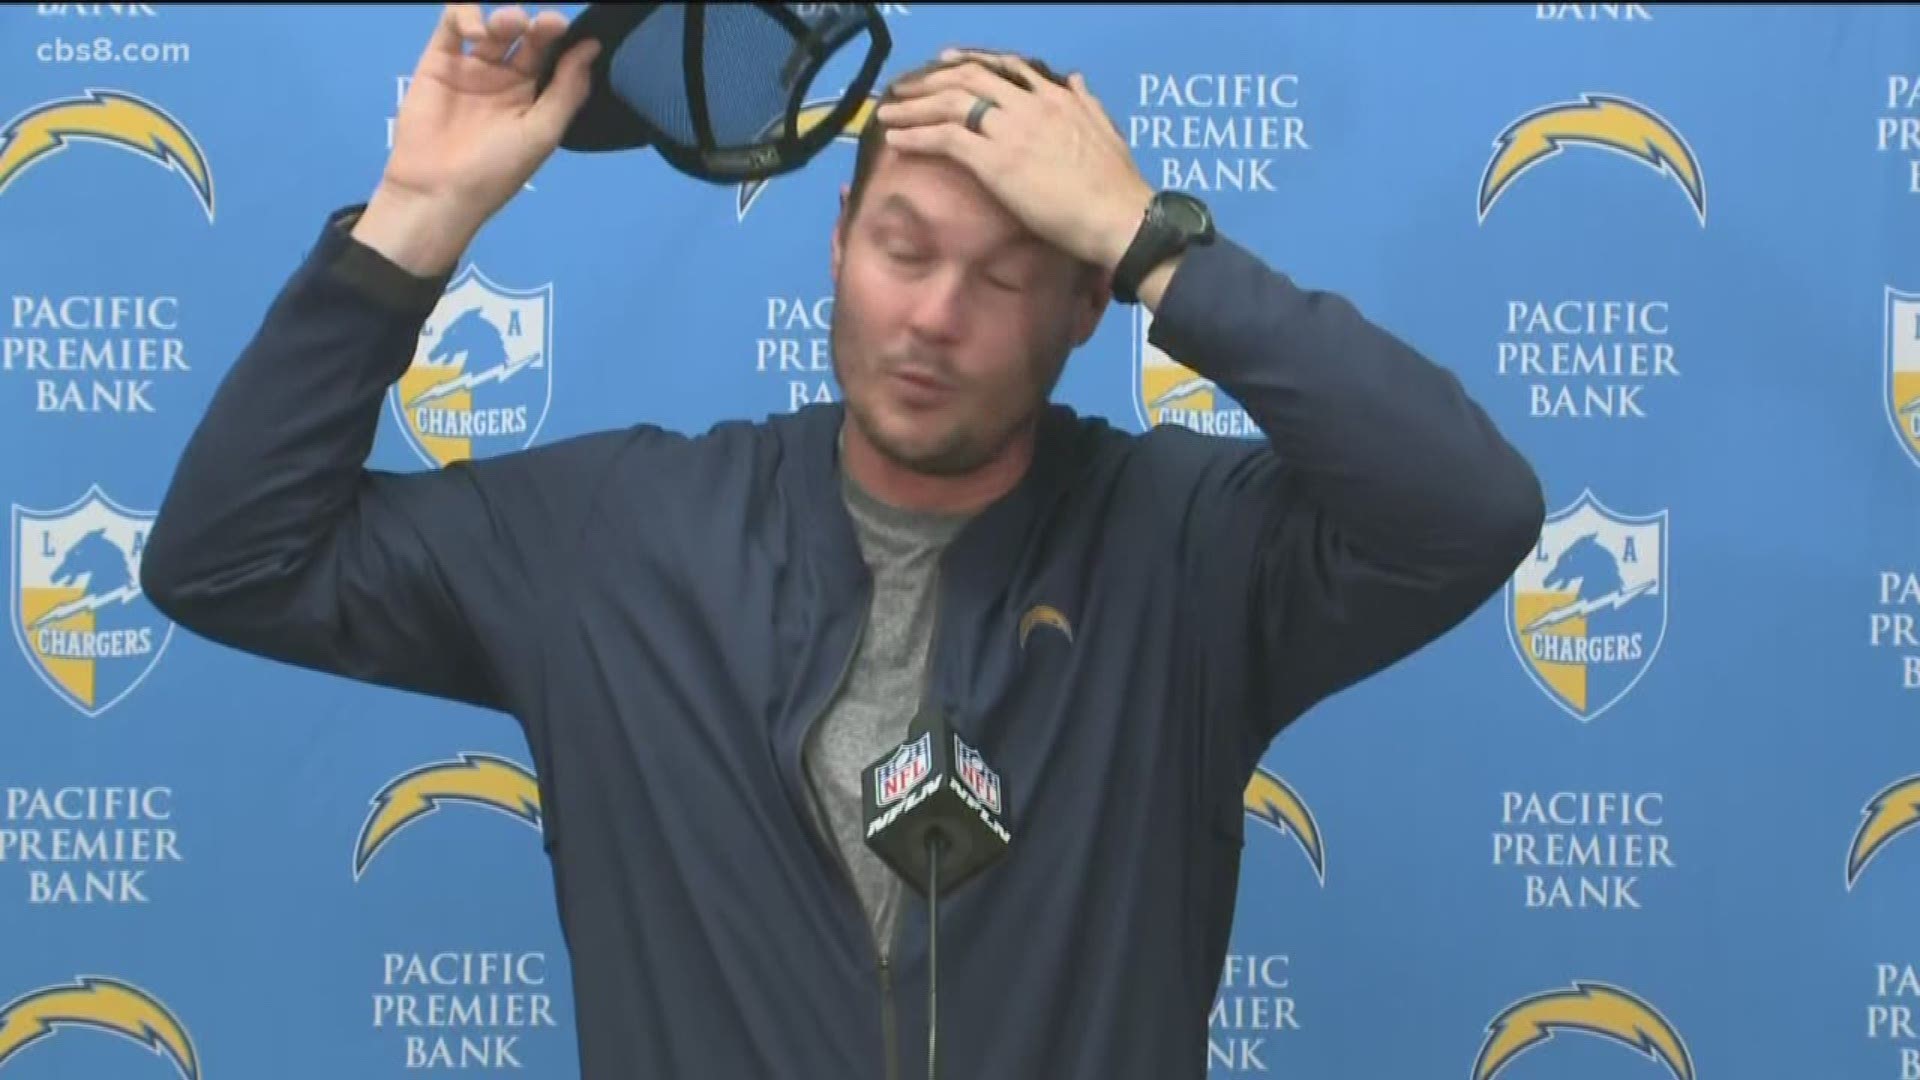 It's the end of era. Philip Rivers and the Los Angeles Chargers part ways. Fans said they saw the writing on the wall.